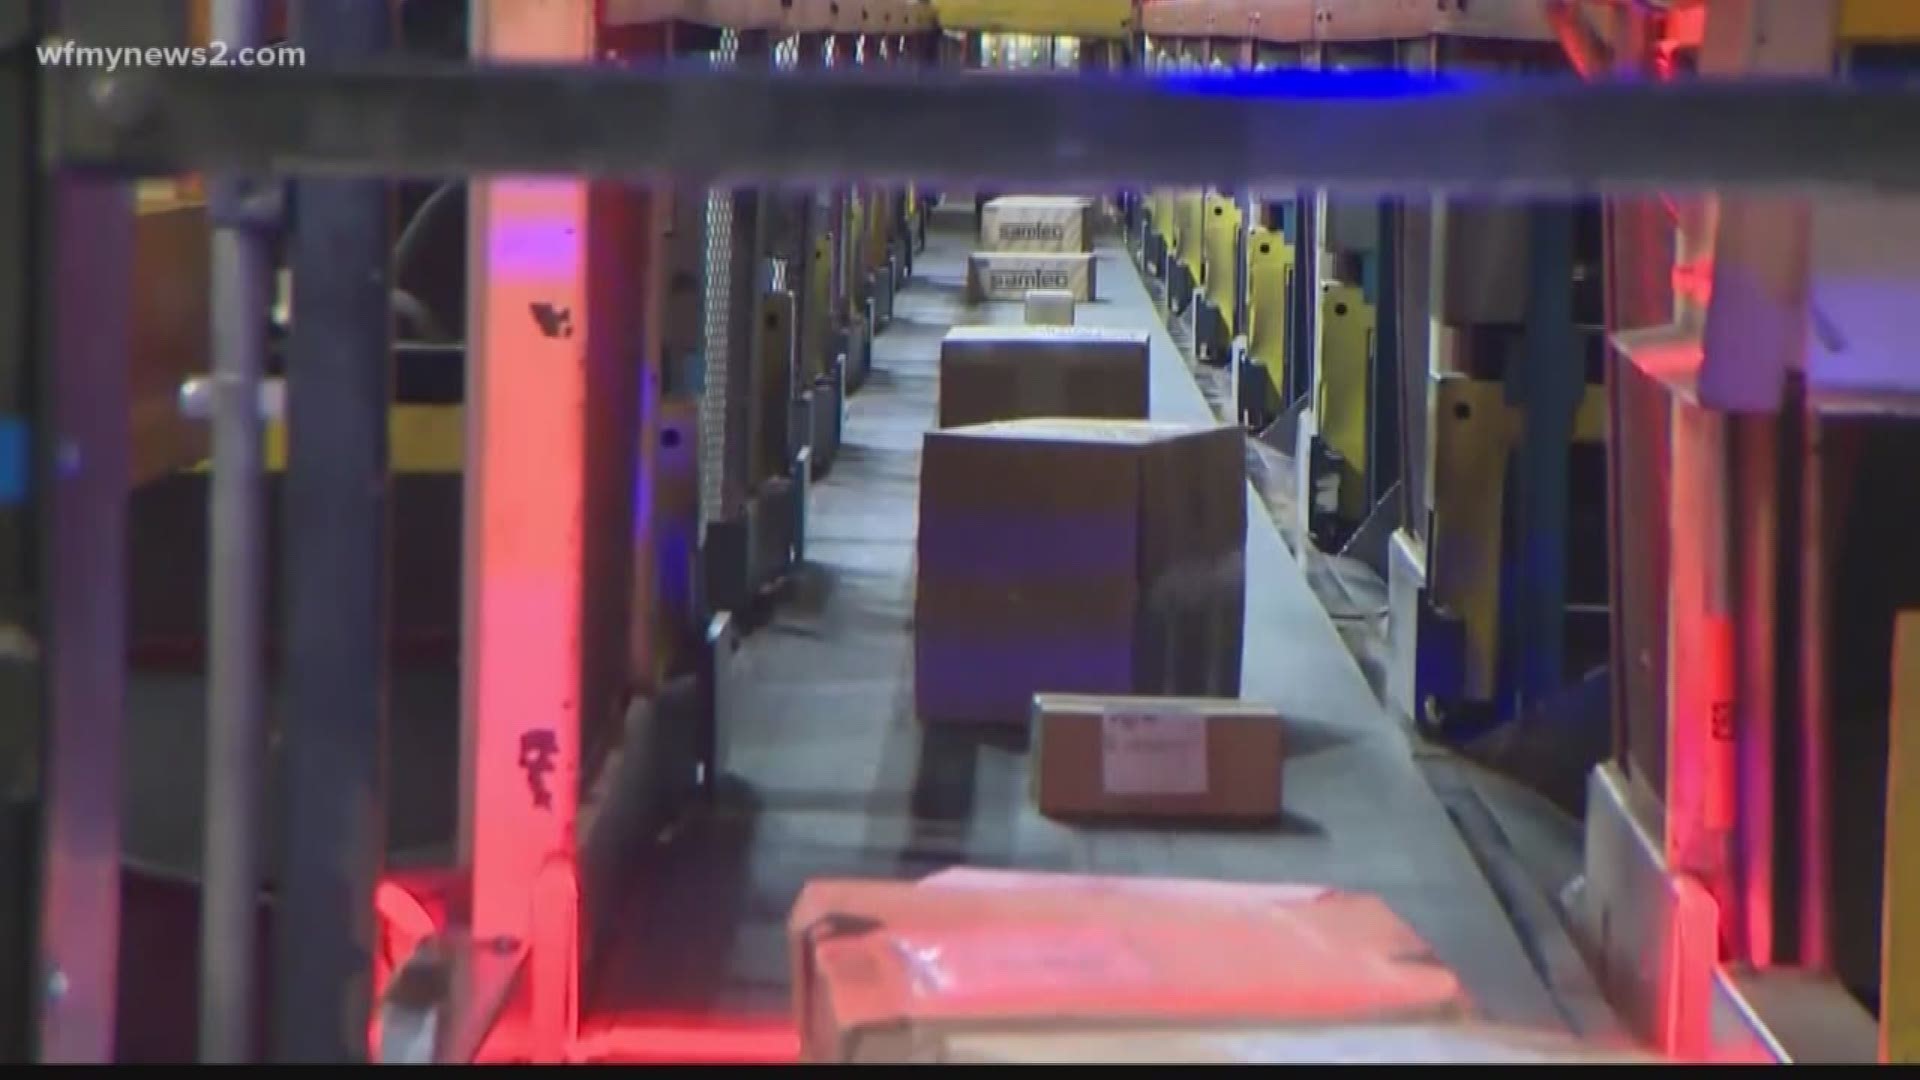 UPS announced they're looking to hire more than 600 seasonal workers for the Holidays